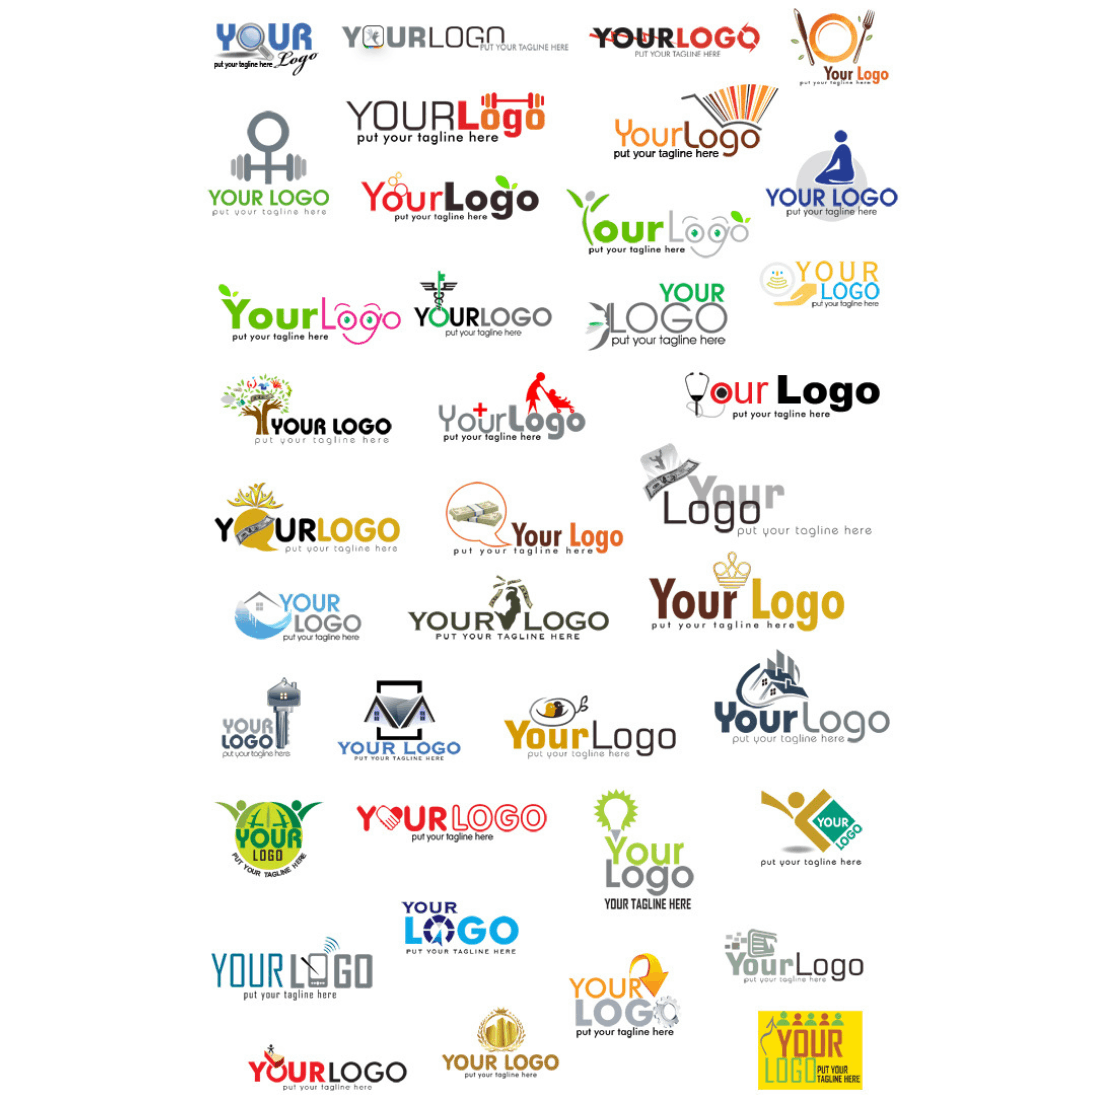 Business Logo Kit All In One Design cover image.